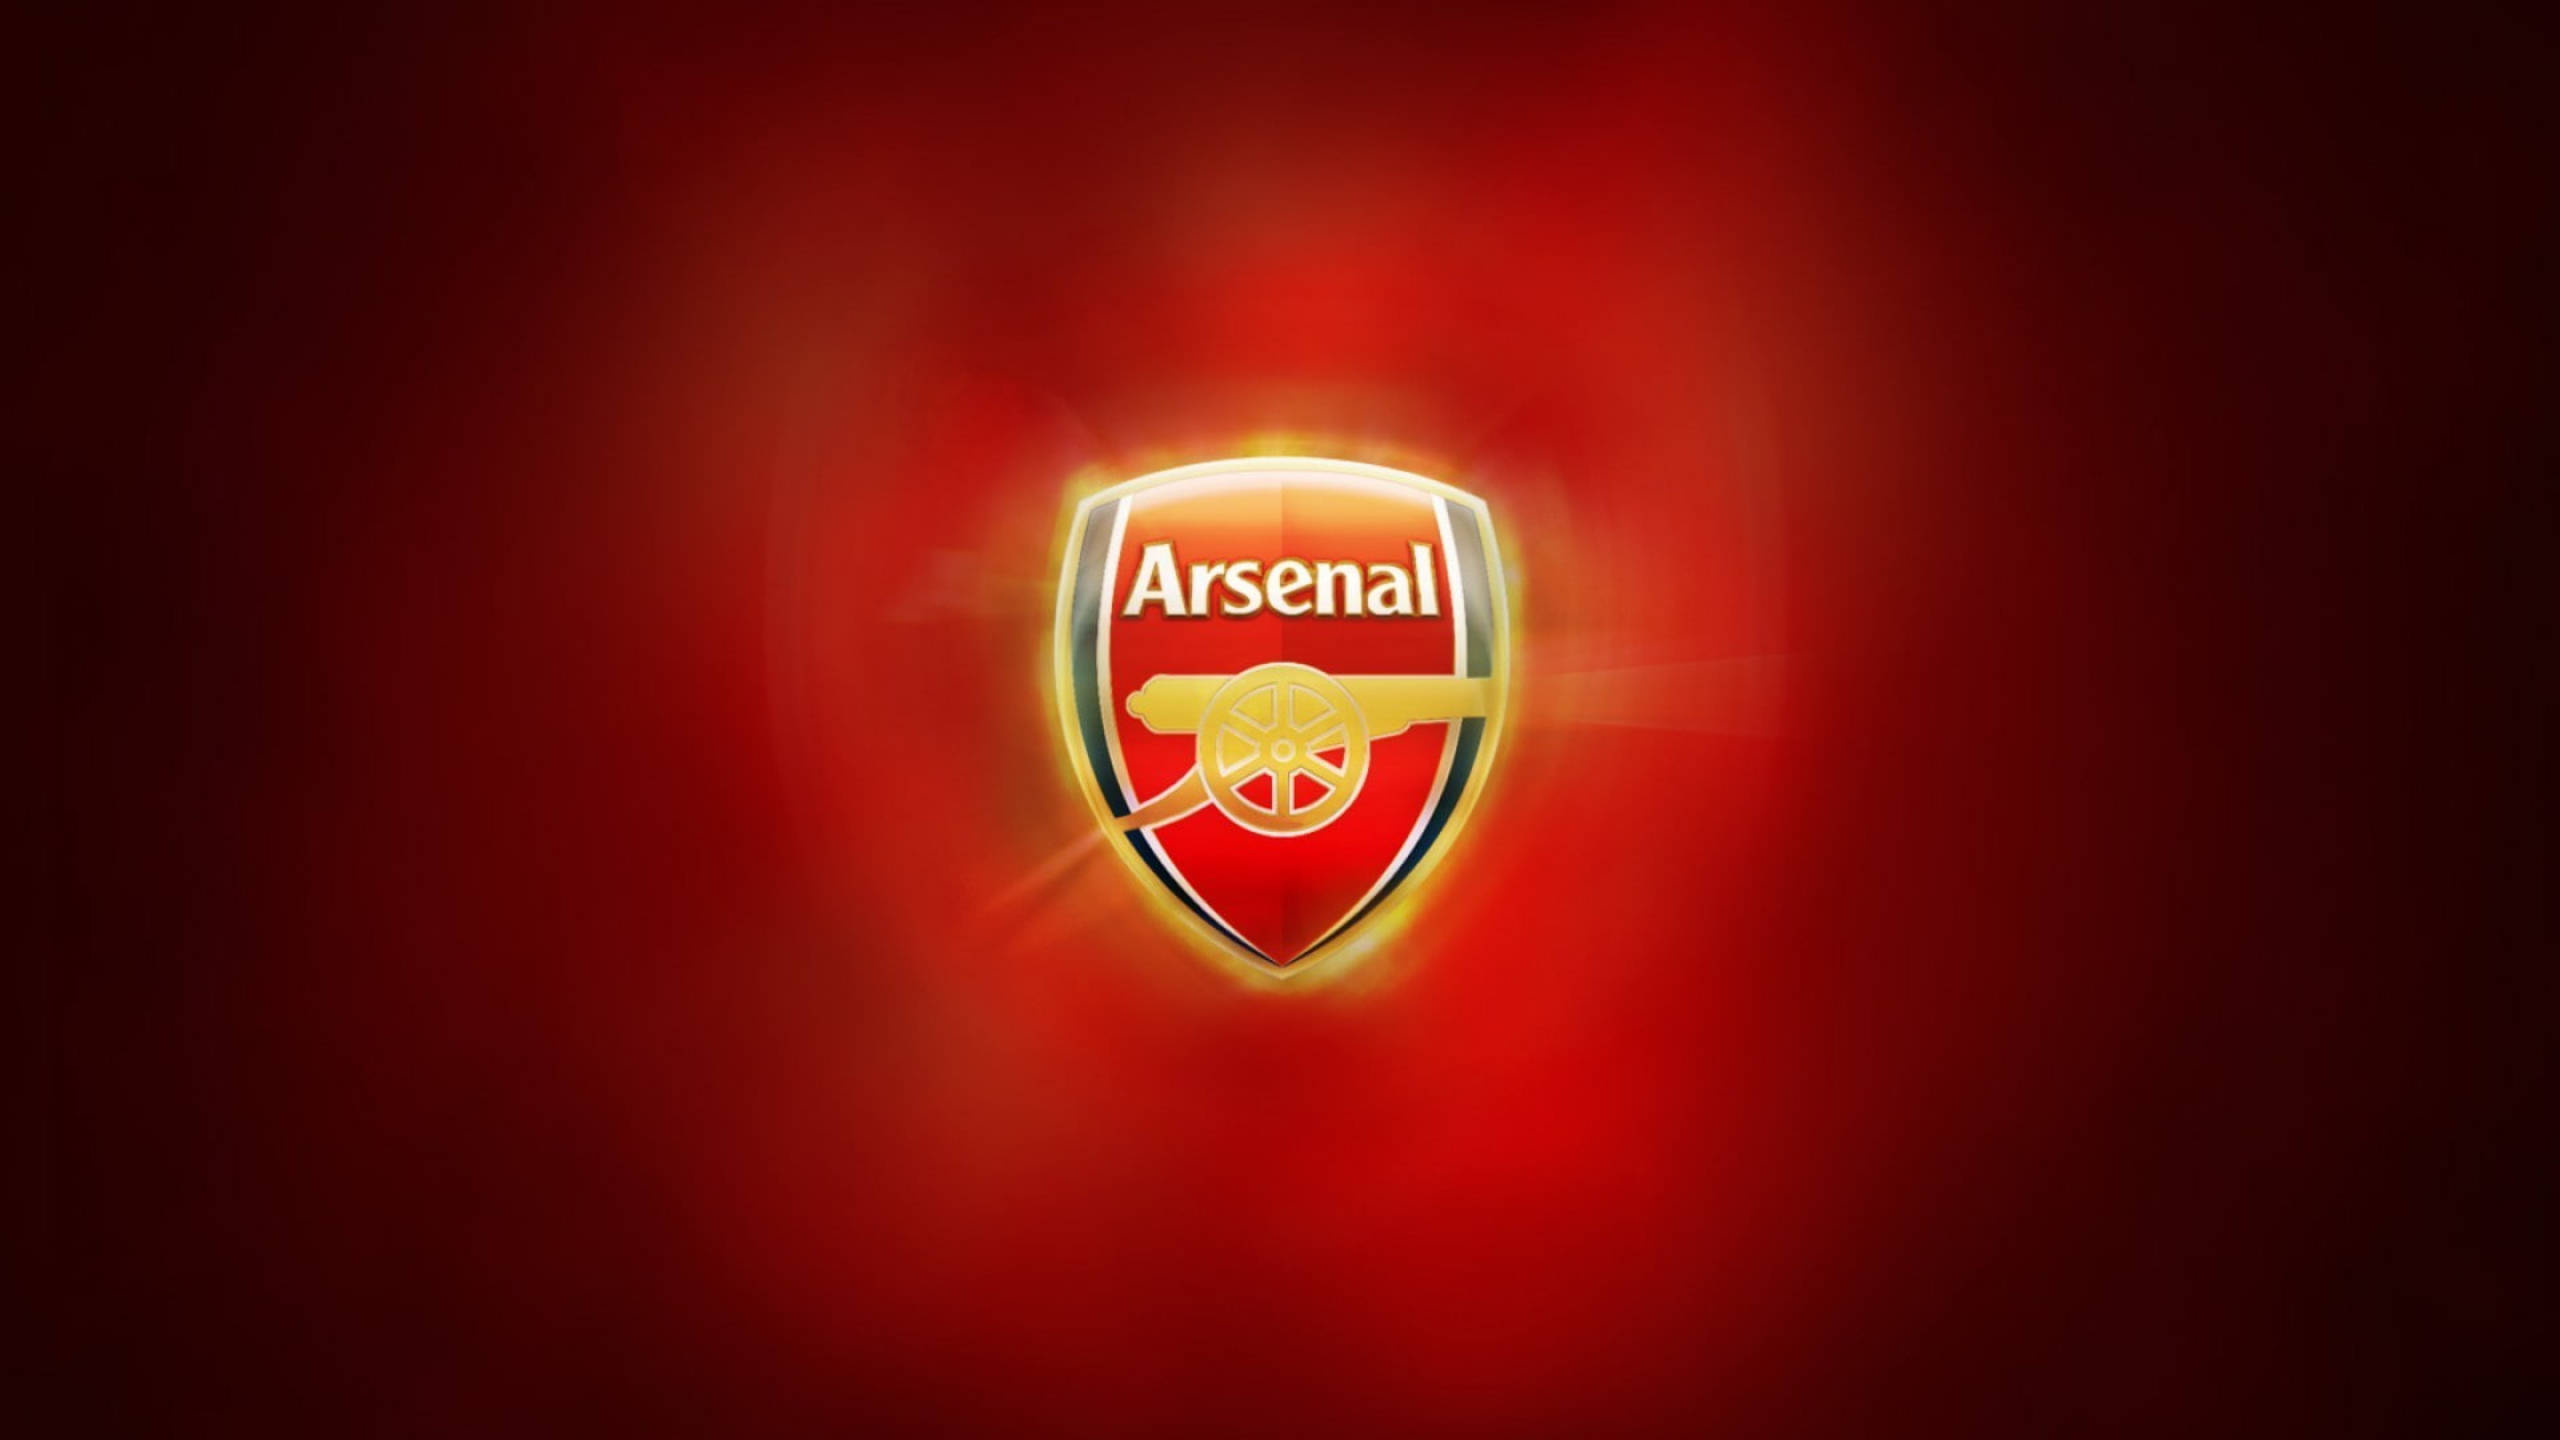 Download Arsenal In Red Aesthetic Wallpaper